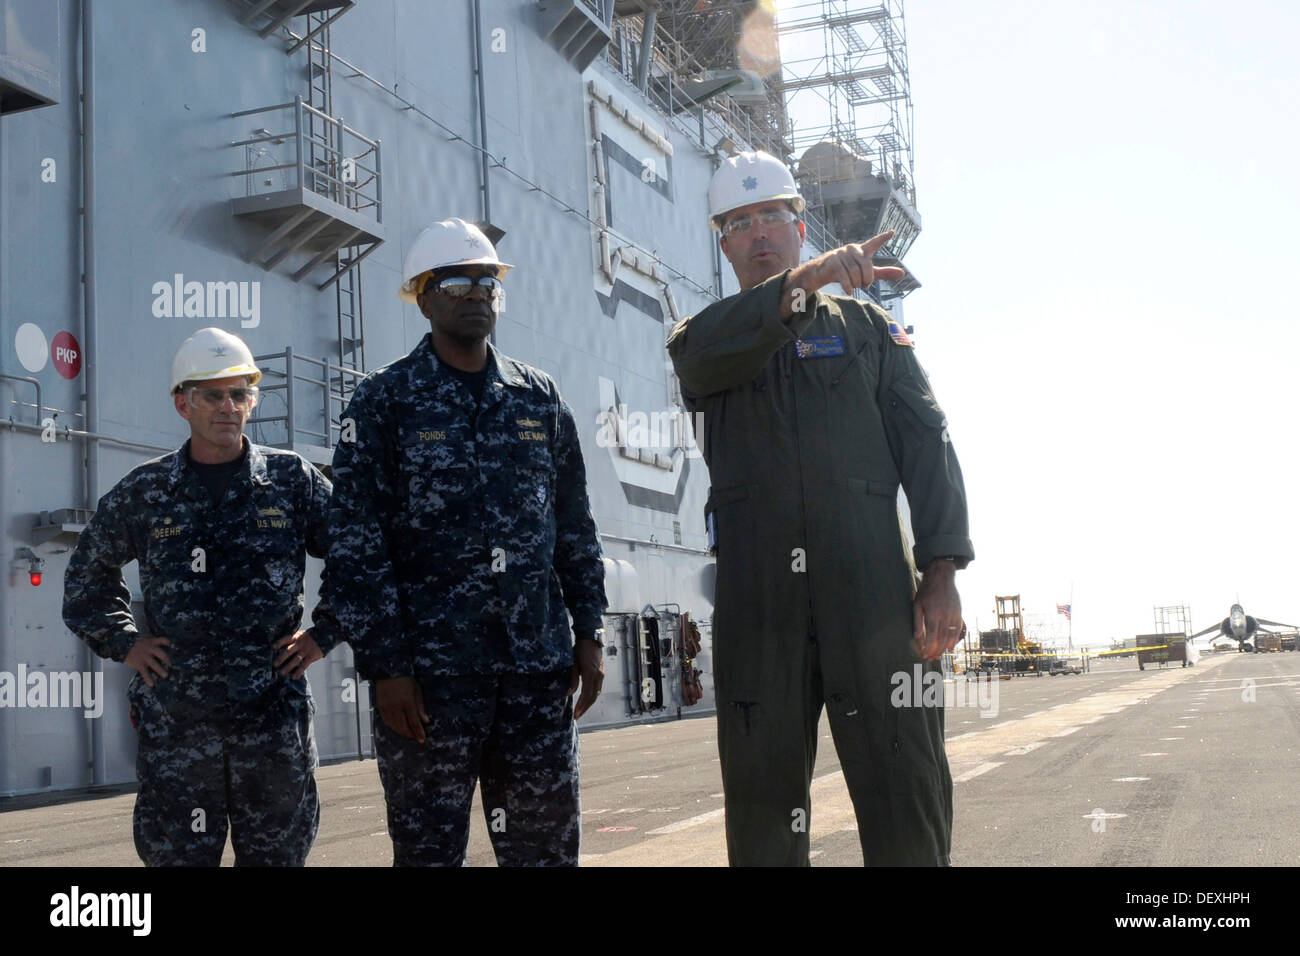 Cmdr. Matthew Niedzwiecki, ship's air boss, discusses maintenance being conducted on the flight deck with Commander, Expeditionary Strike Group 3 Rear Adm. Frank L. Ponds during his visit to amphibious assault ship USS Peleliu (LHA 5). Peleliu is currentl Stock Photo